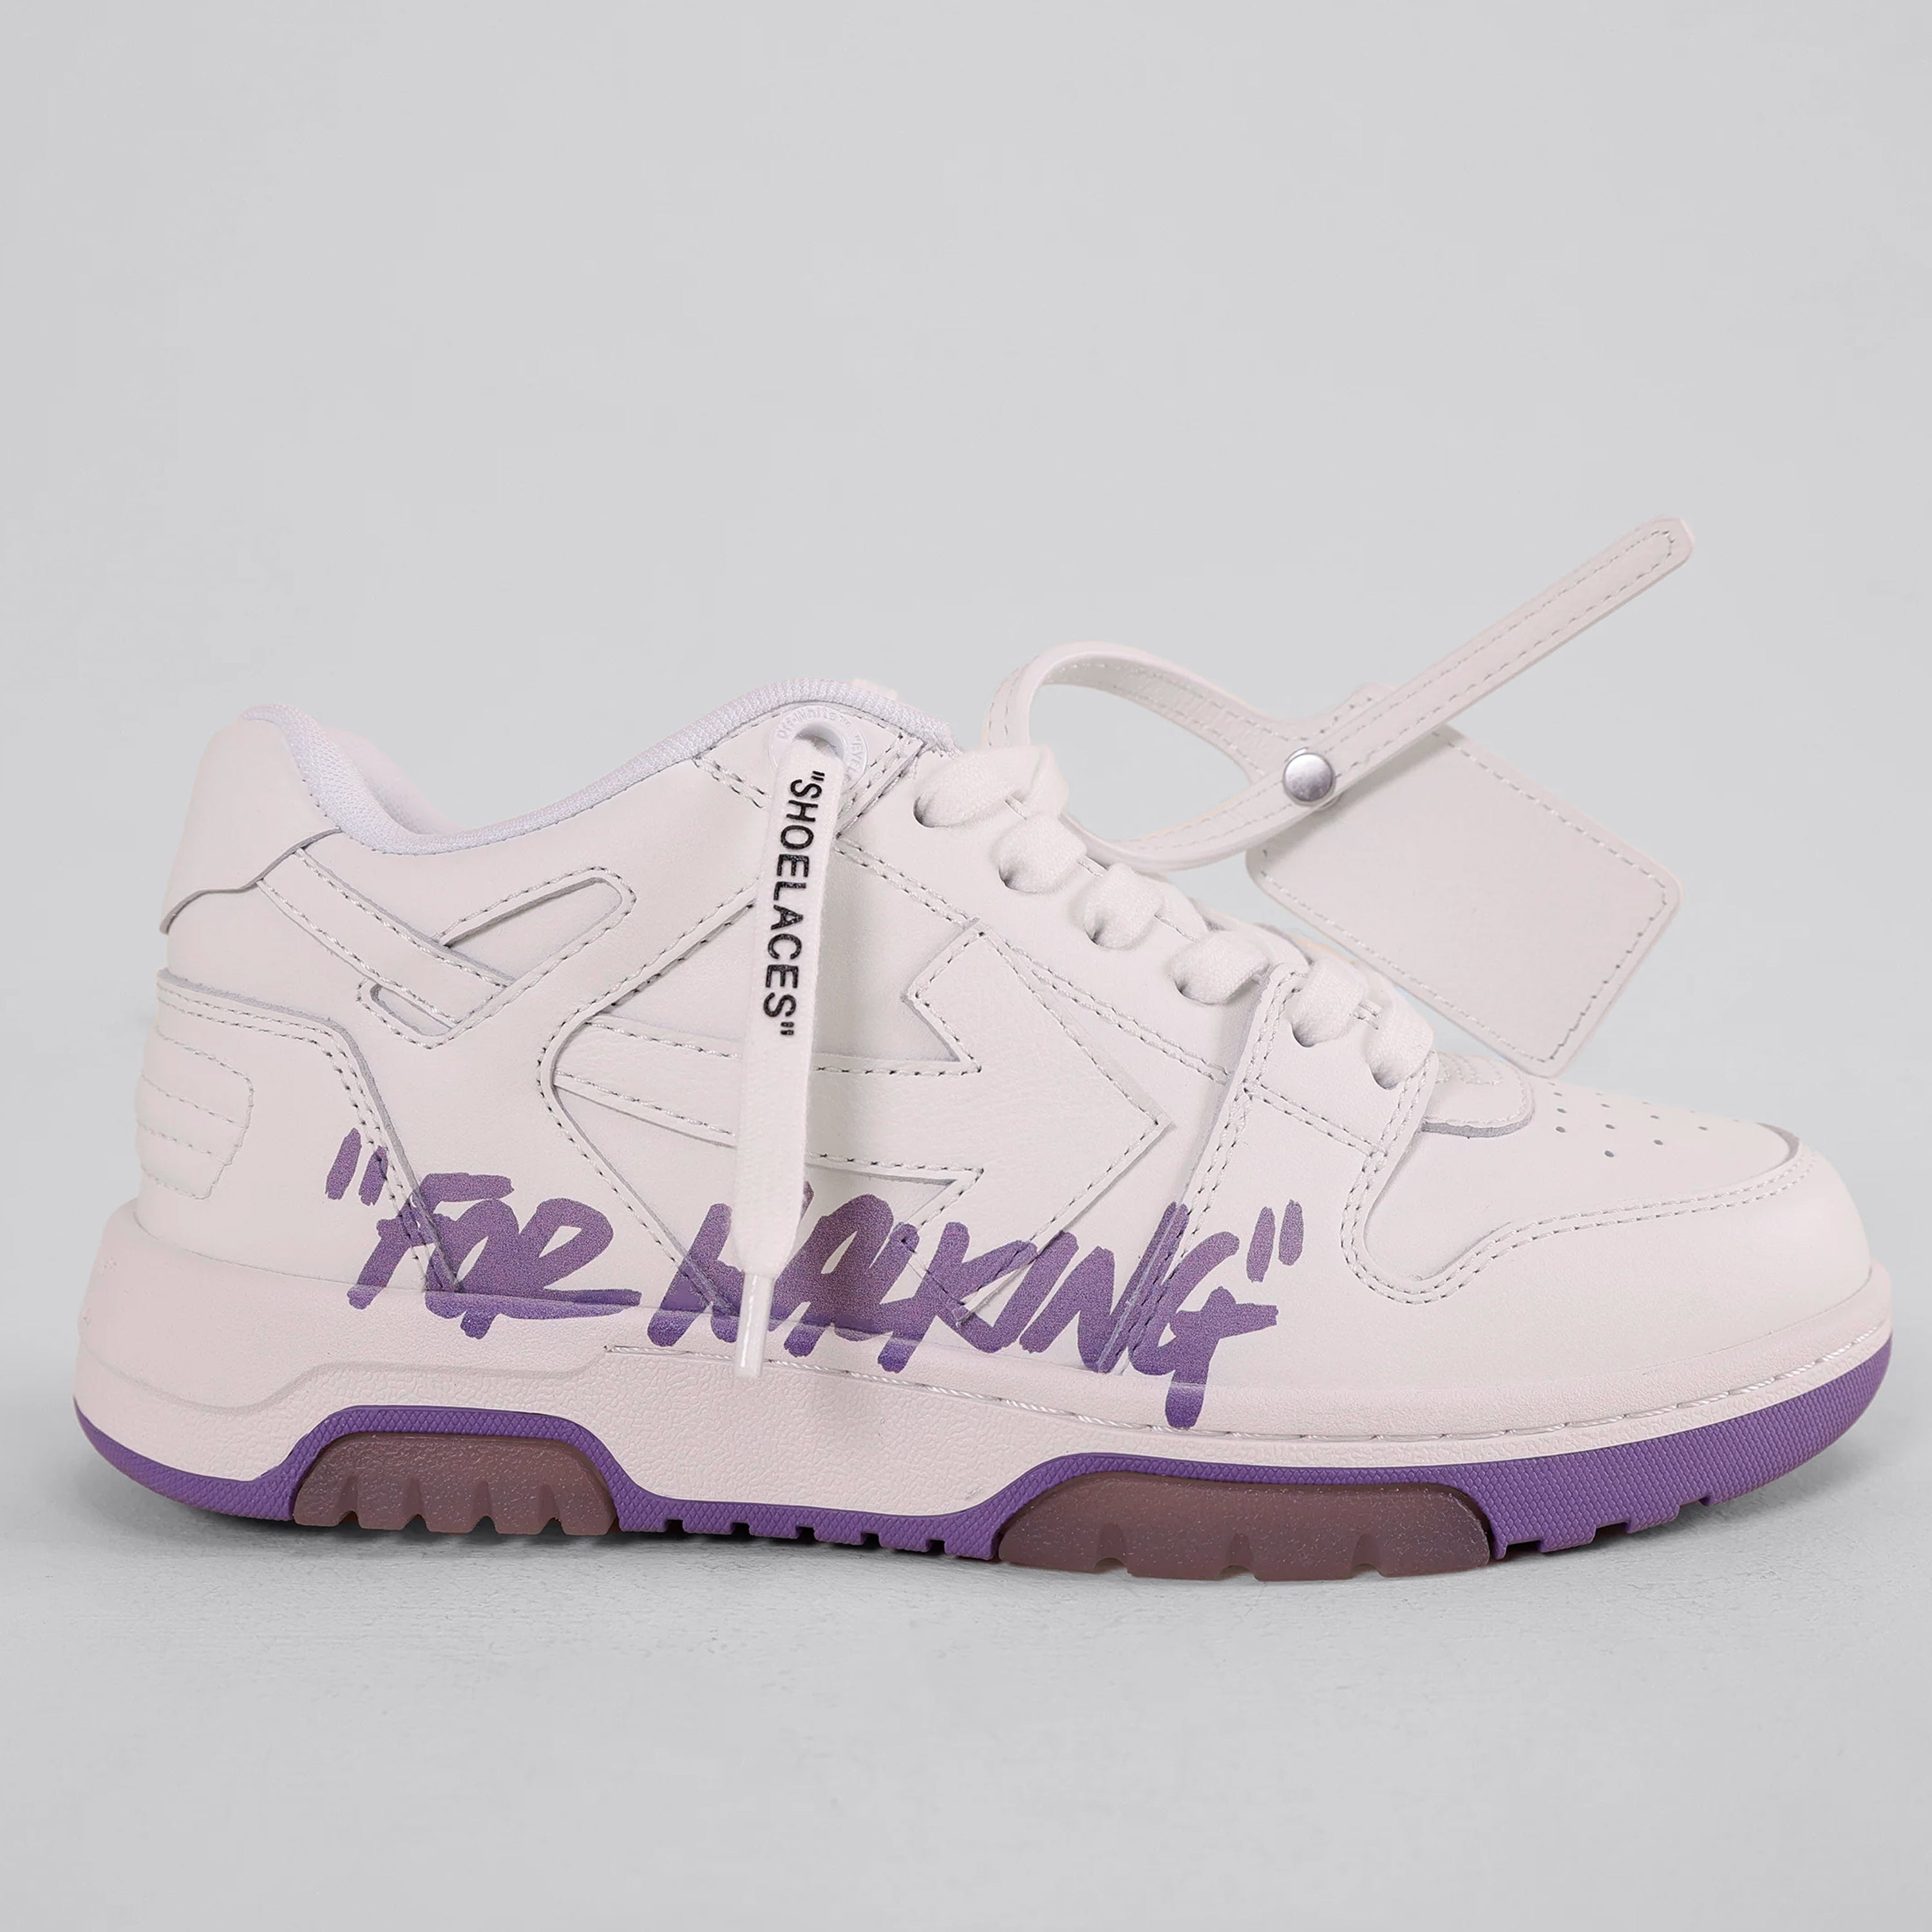 Sneakers White Lila Off-White "OOO" For Walking